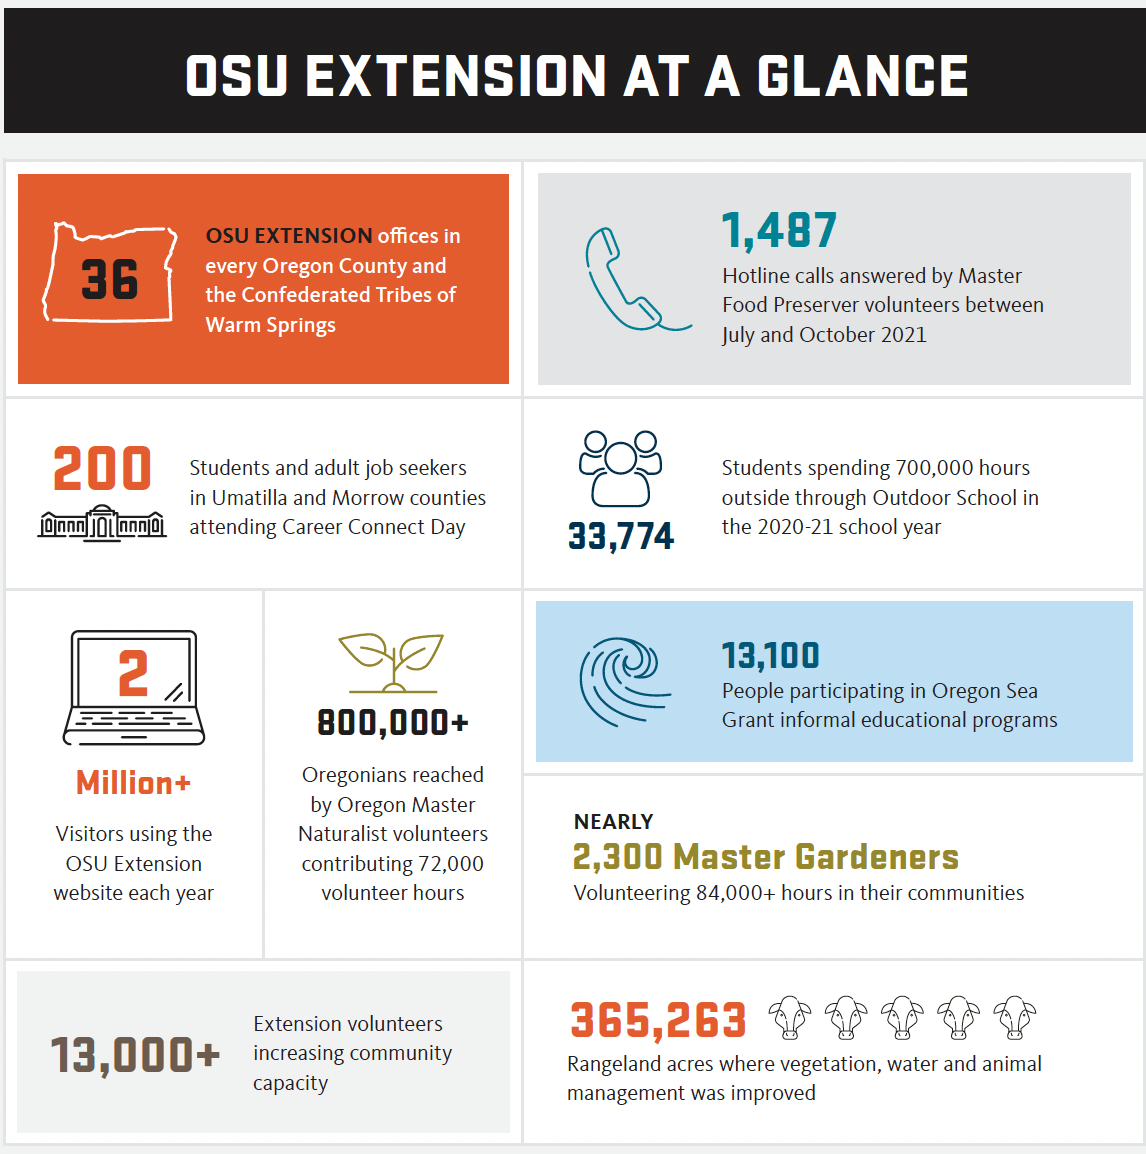 OSU Extension at a Glance infographic of statistics